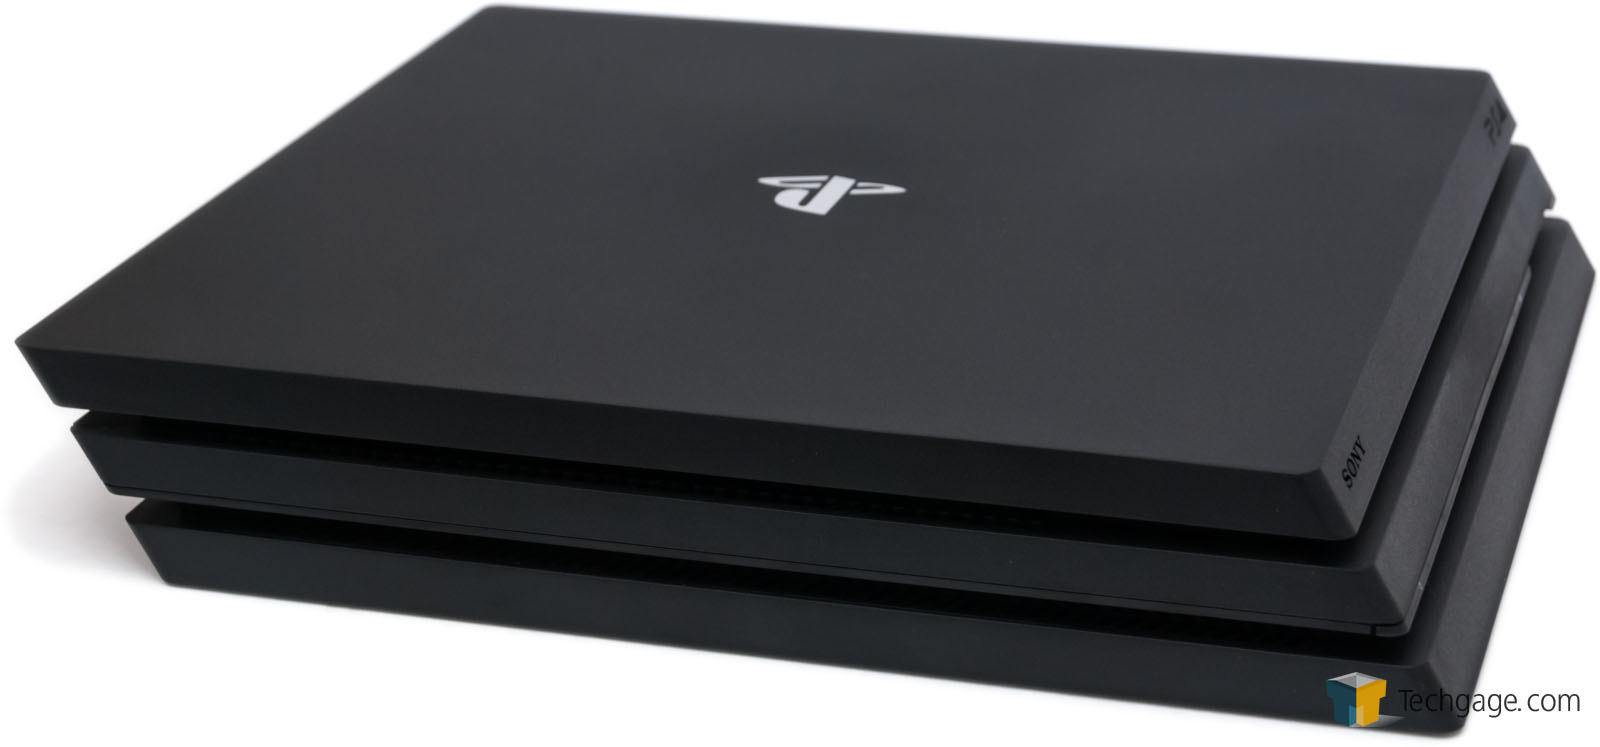 Gå glip af bagagerum Diagnose PlayStation 4 Pro Review: Is This “4K” Machine Worth An Upgrade? – Techgage